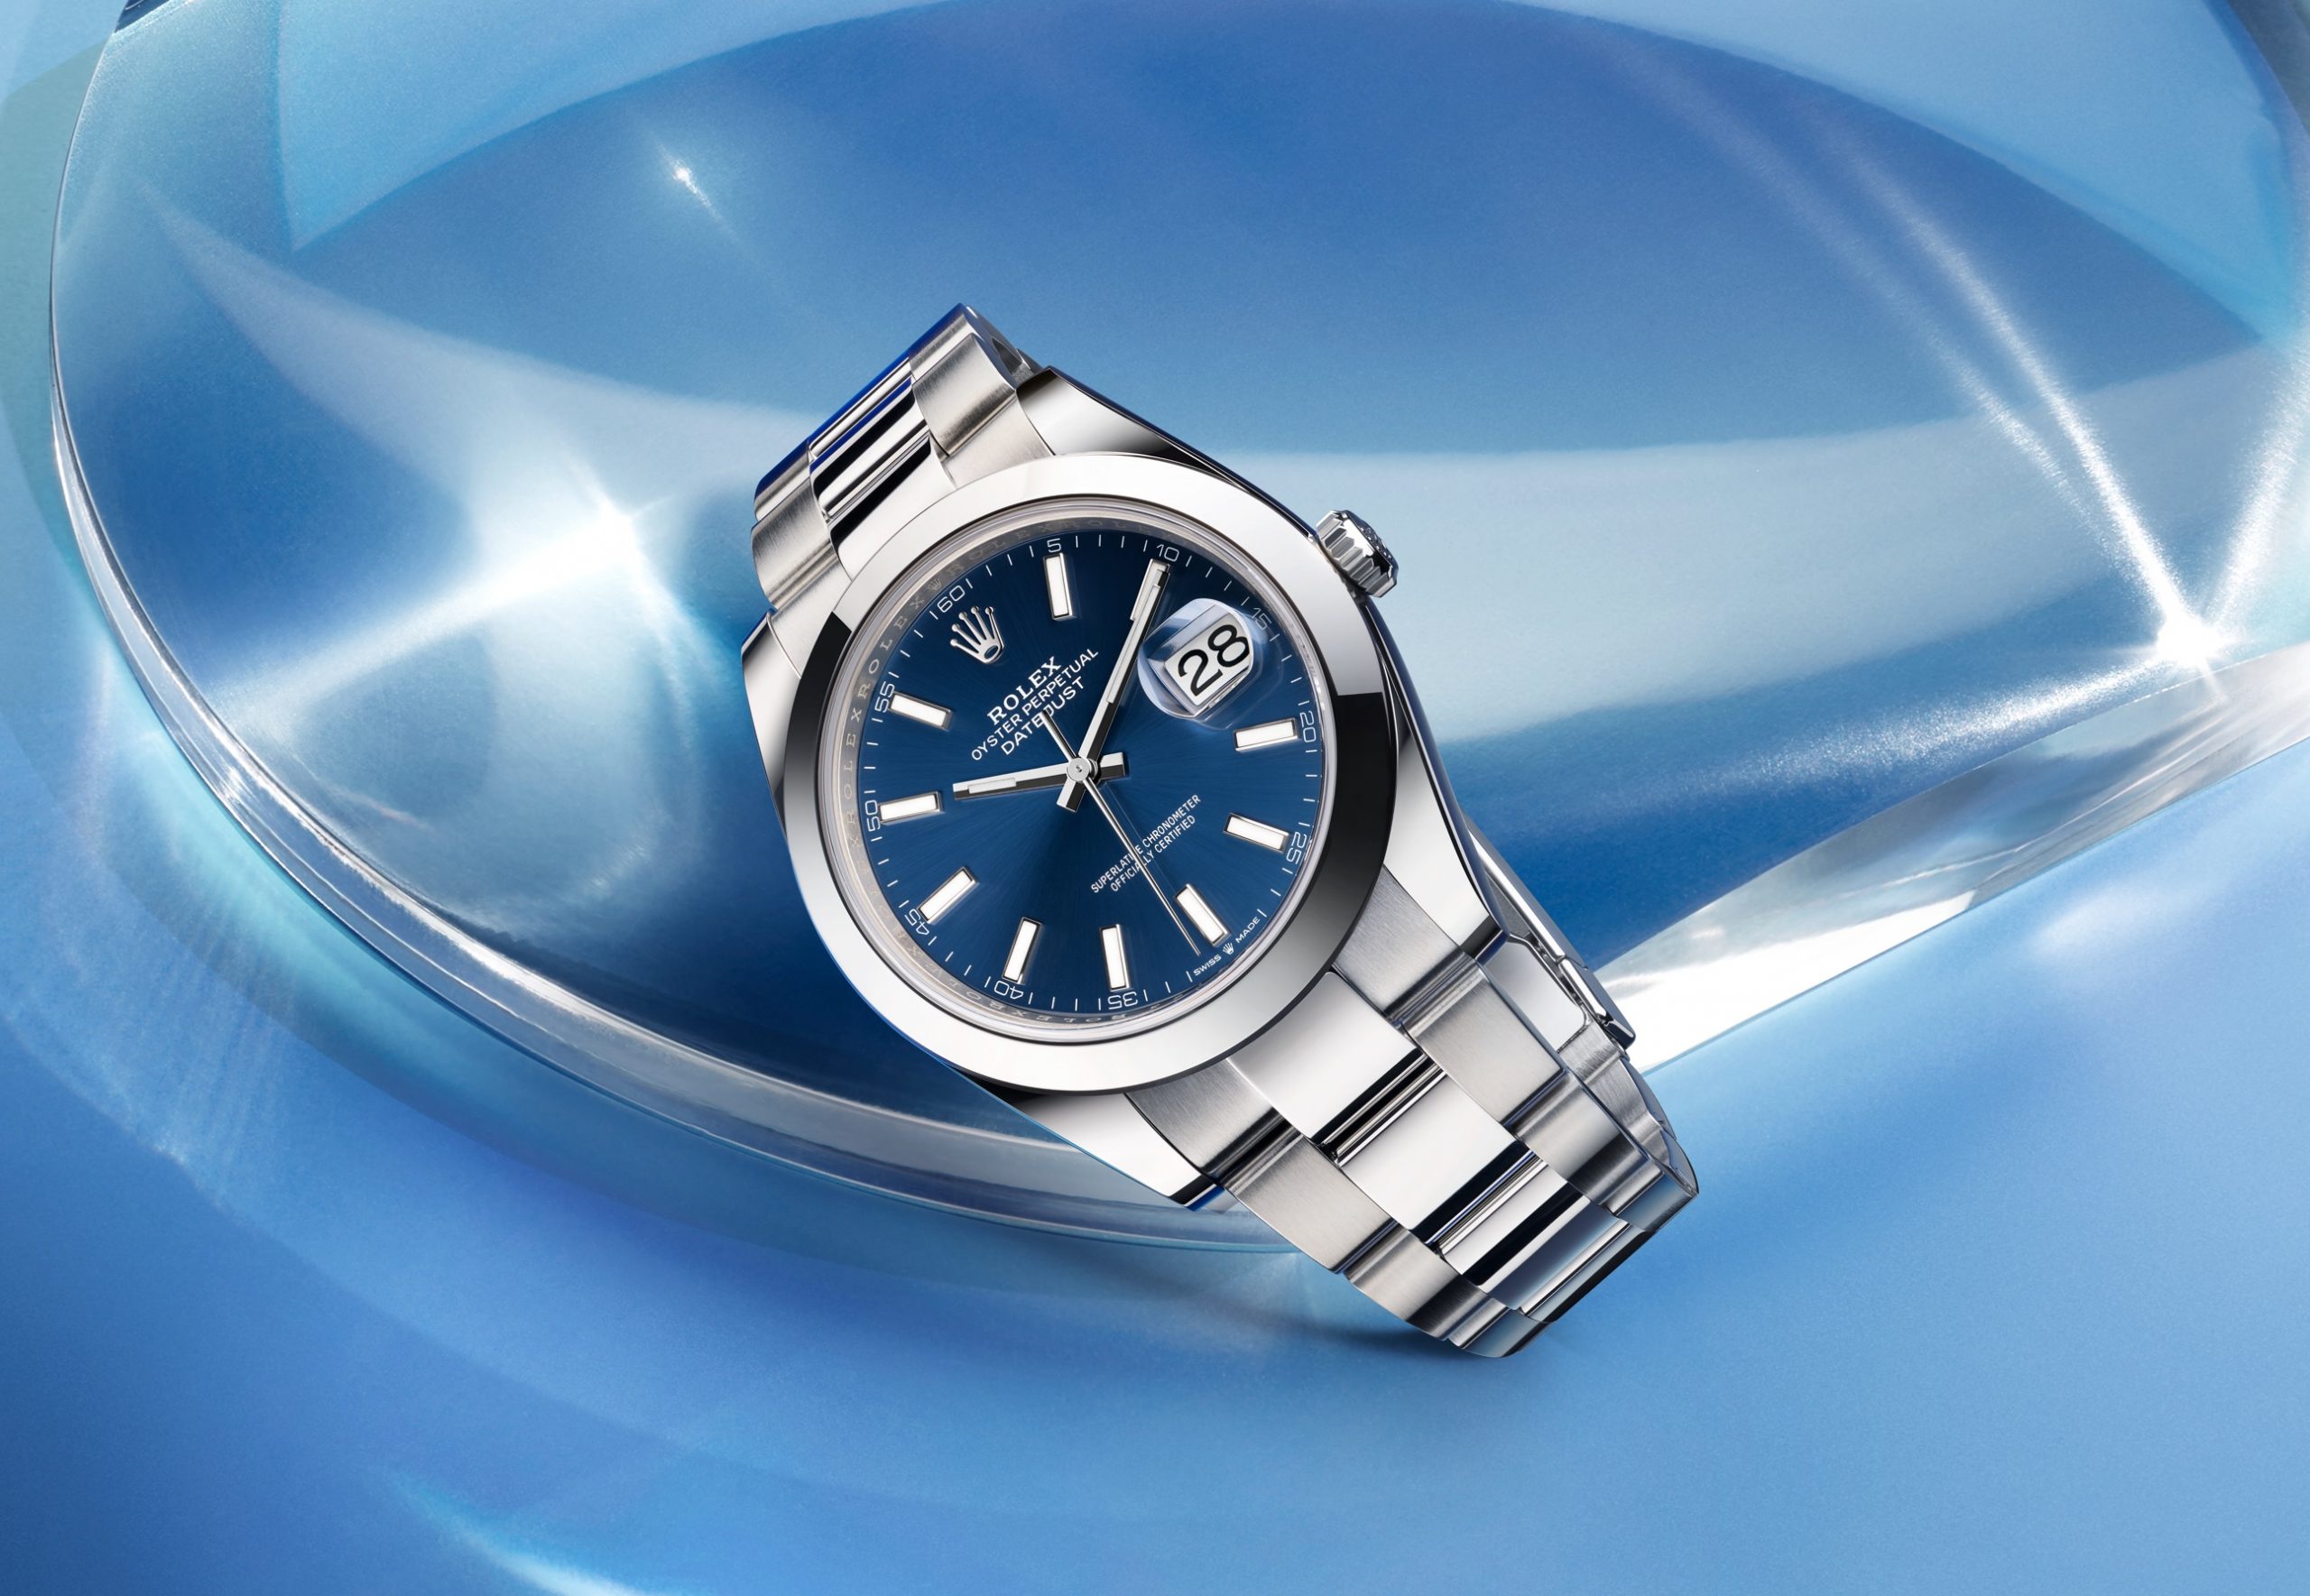 Datejust 41 in Oystersteel with blue dial against blue background